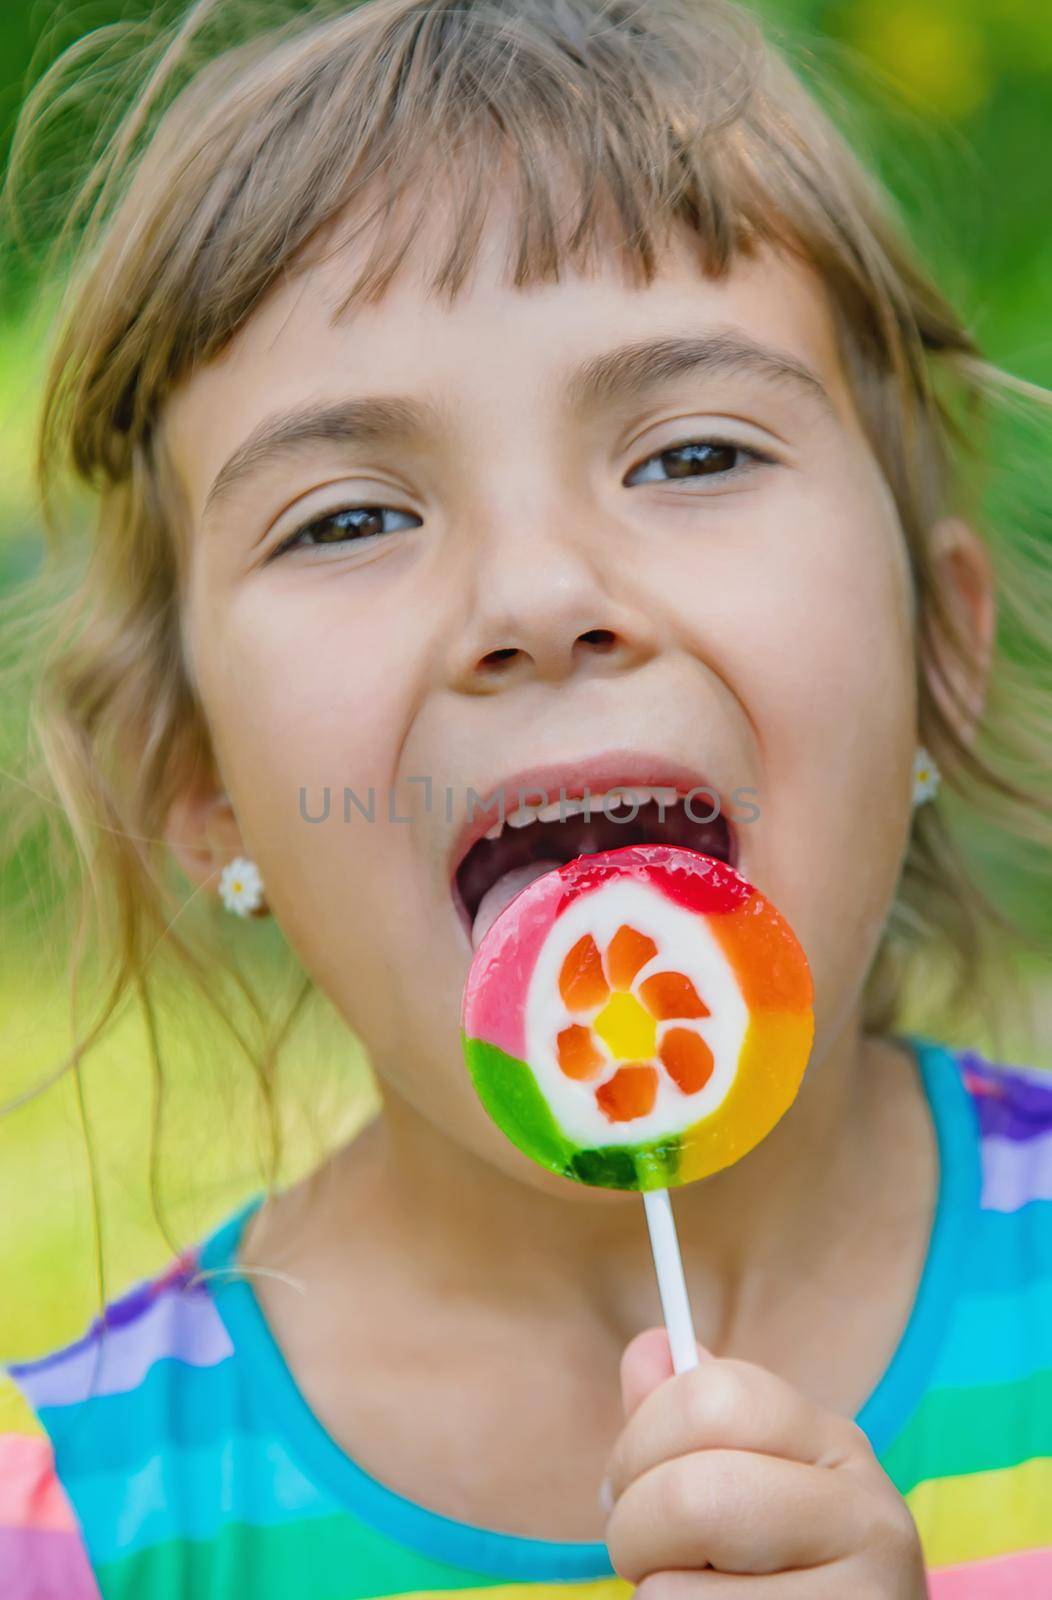 Lollipops in the hands of child. Selective focus.